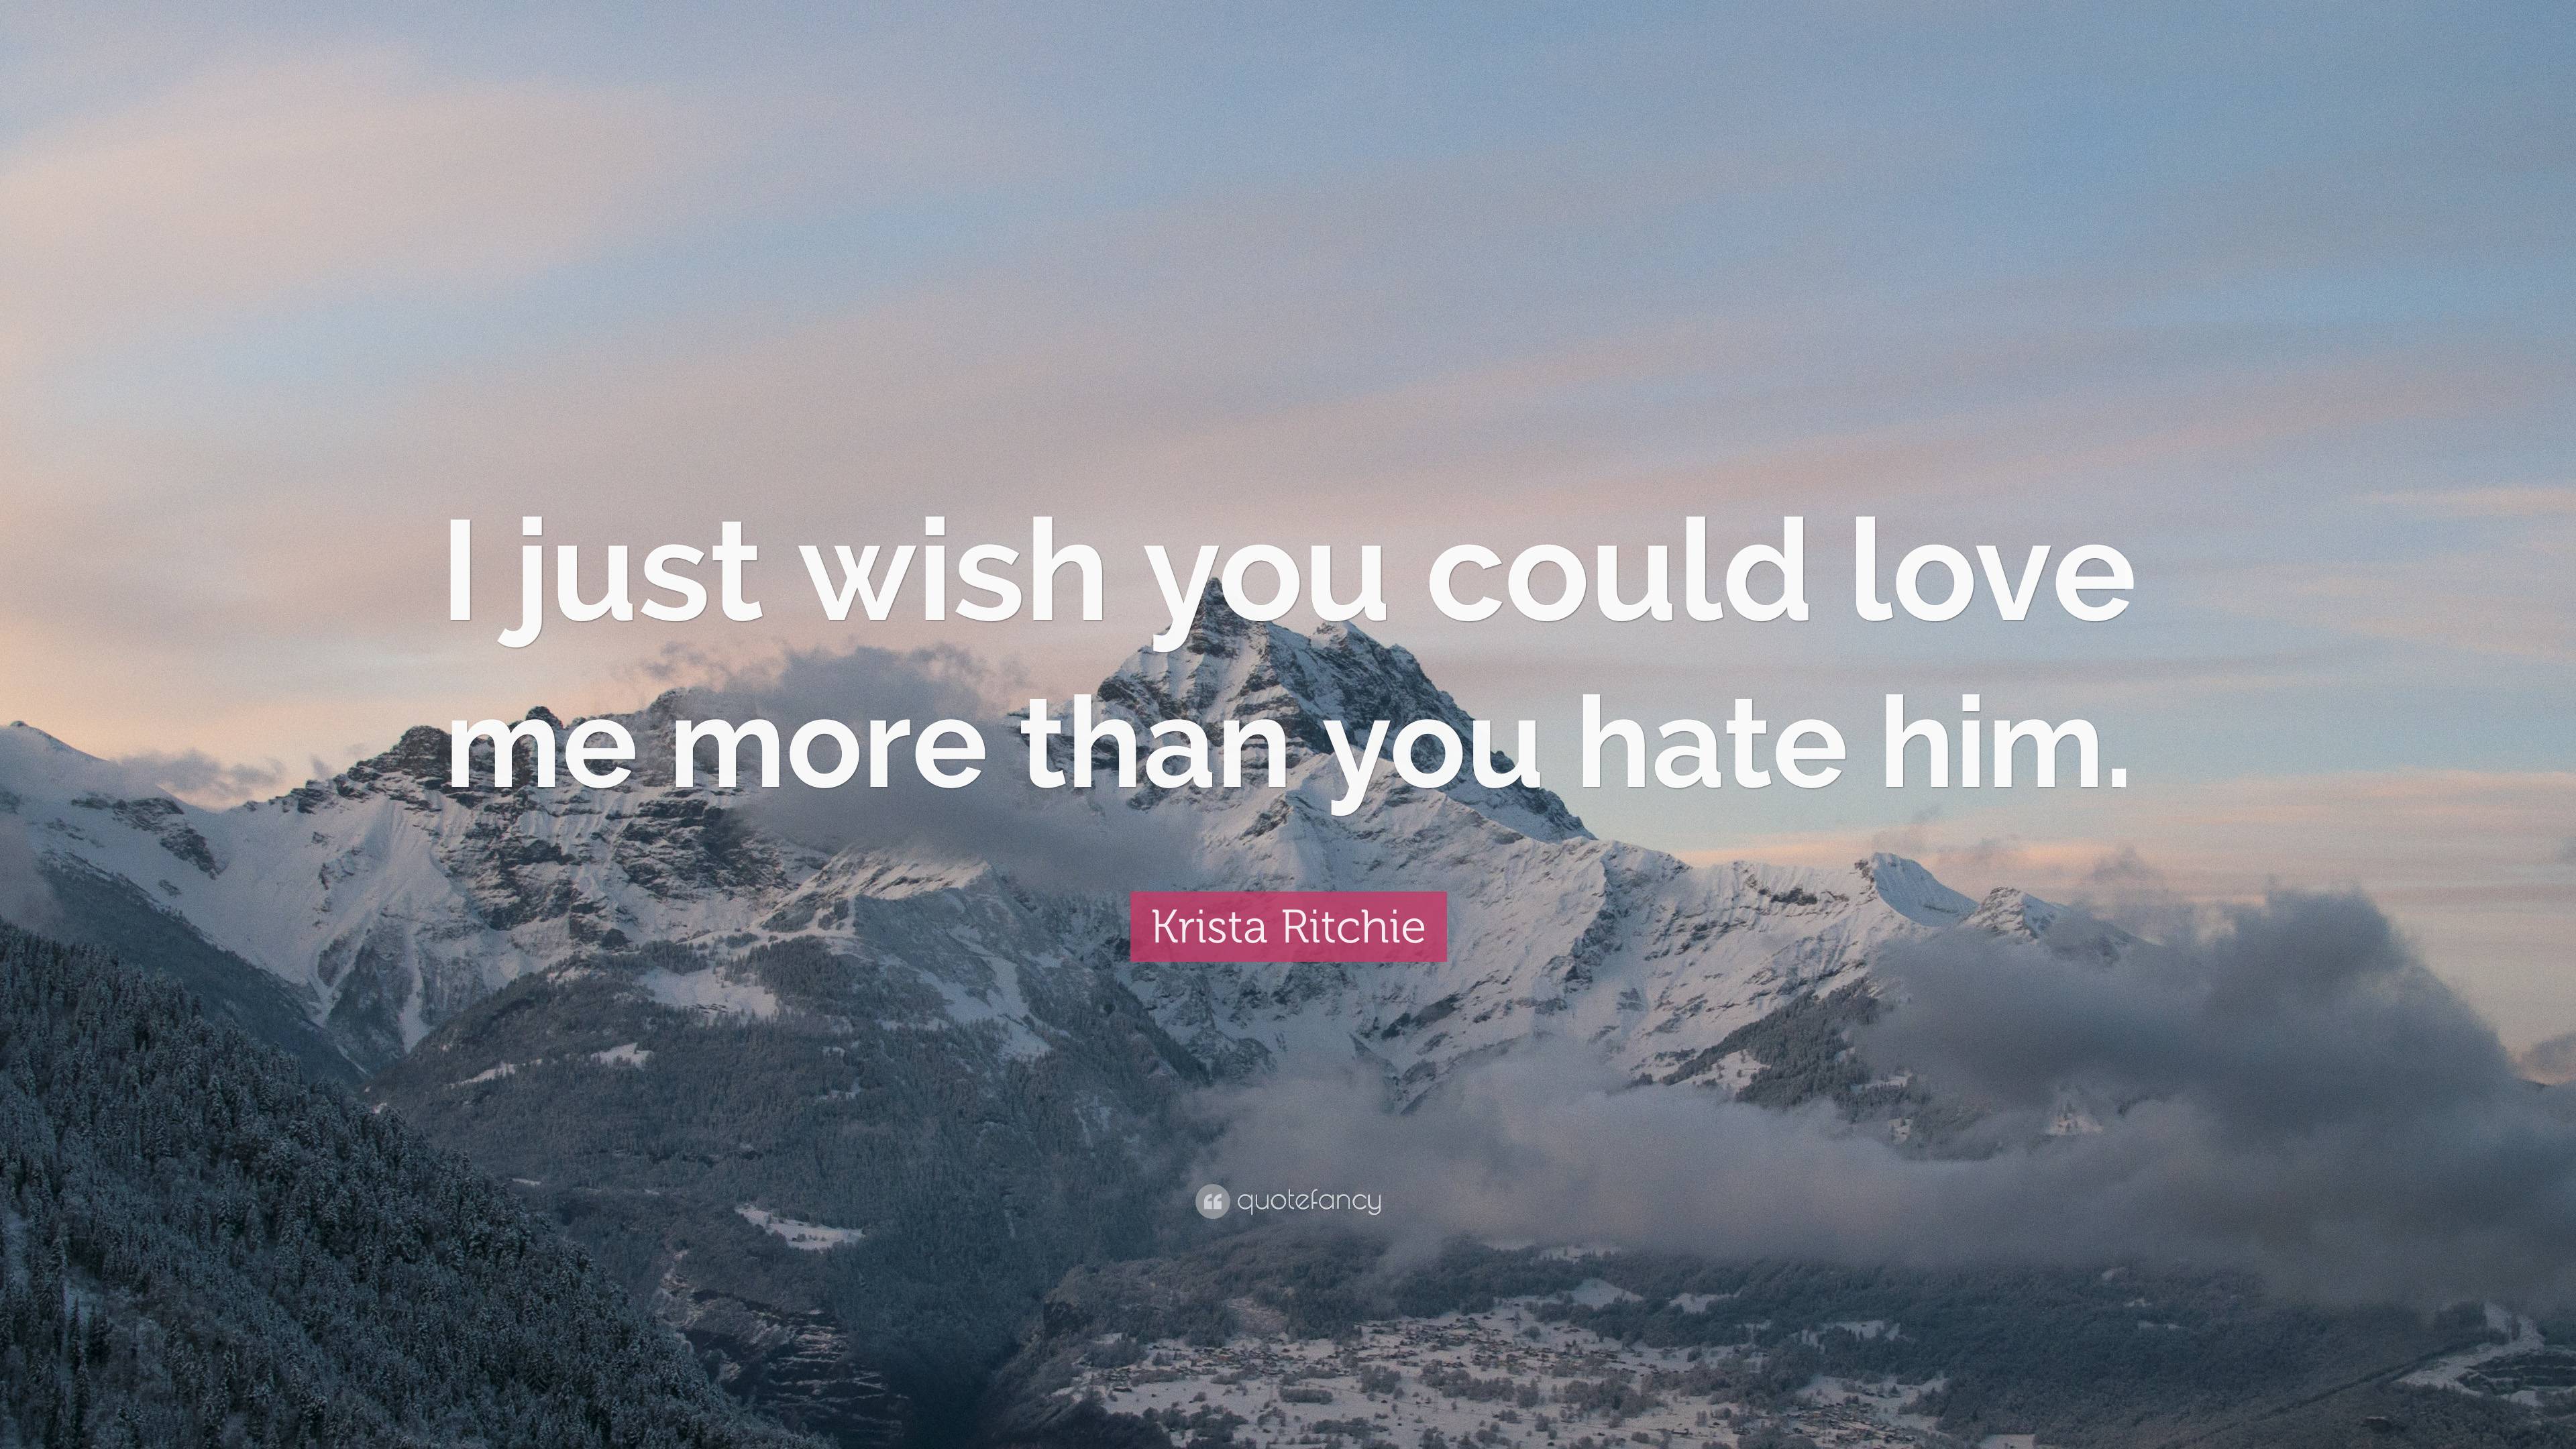 Krista Ritchie Quote: “I just wish you could love me more than you hate ...